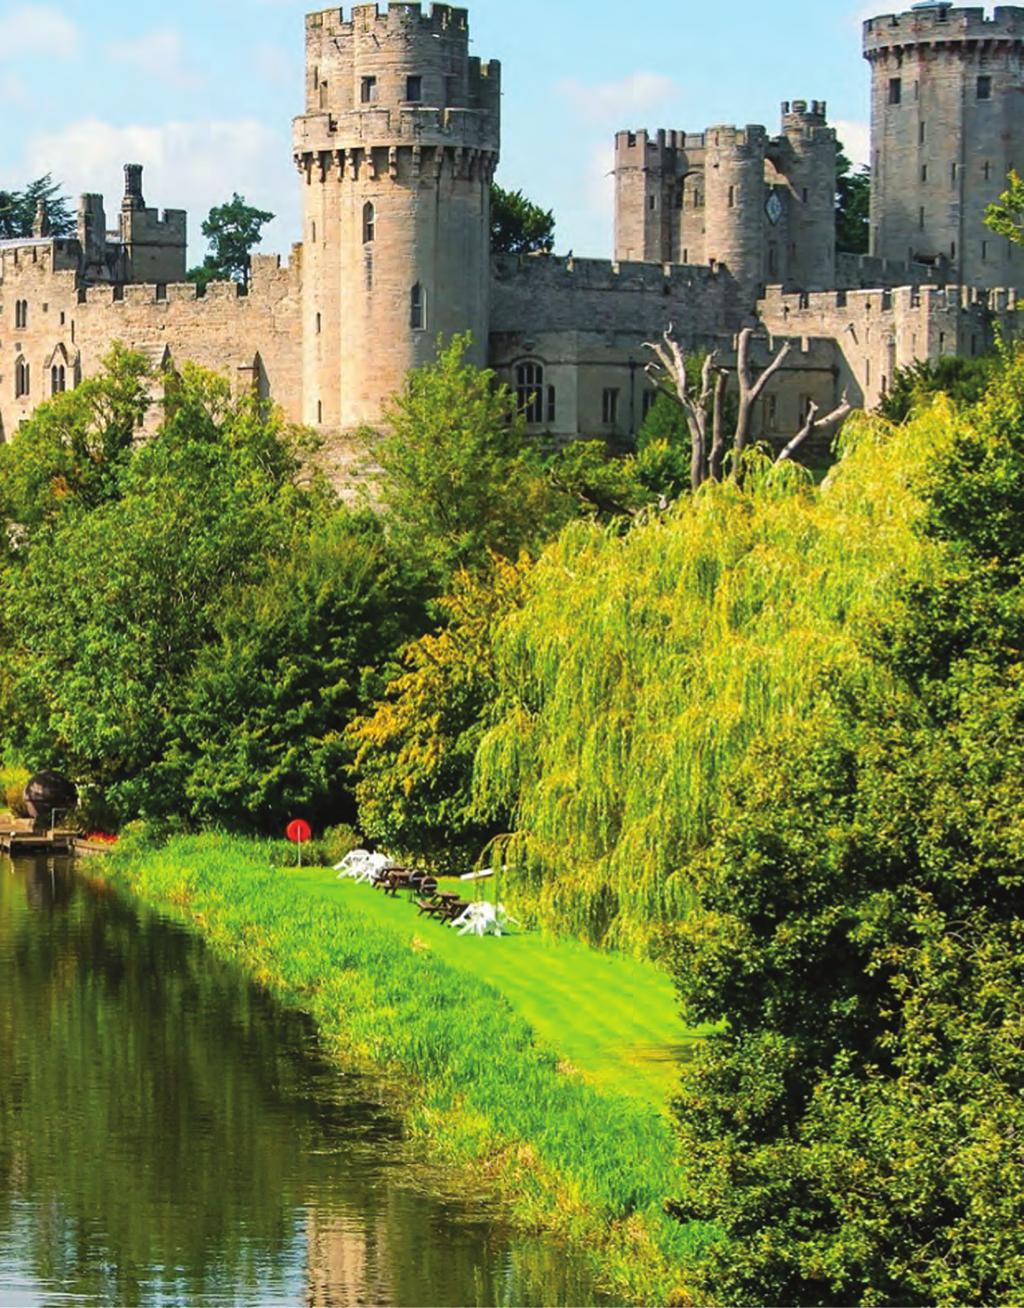 Why work in Warwick or move to the area? Warwick is the County Town and sits on the banks of the beautiful River Avon.